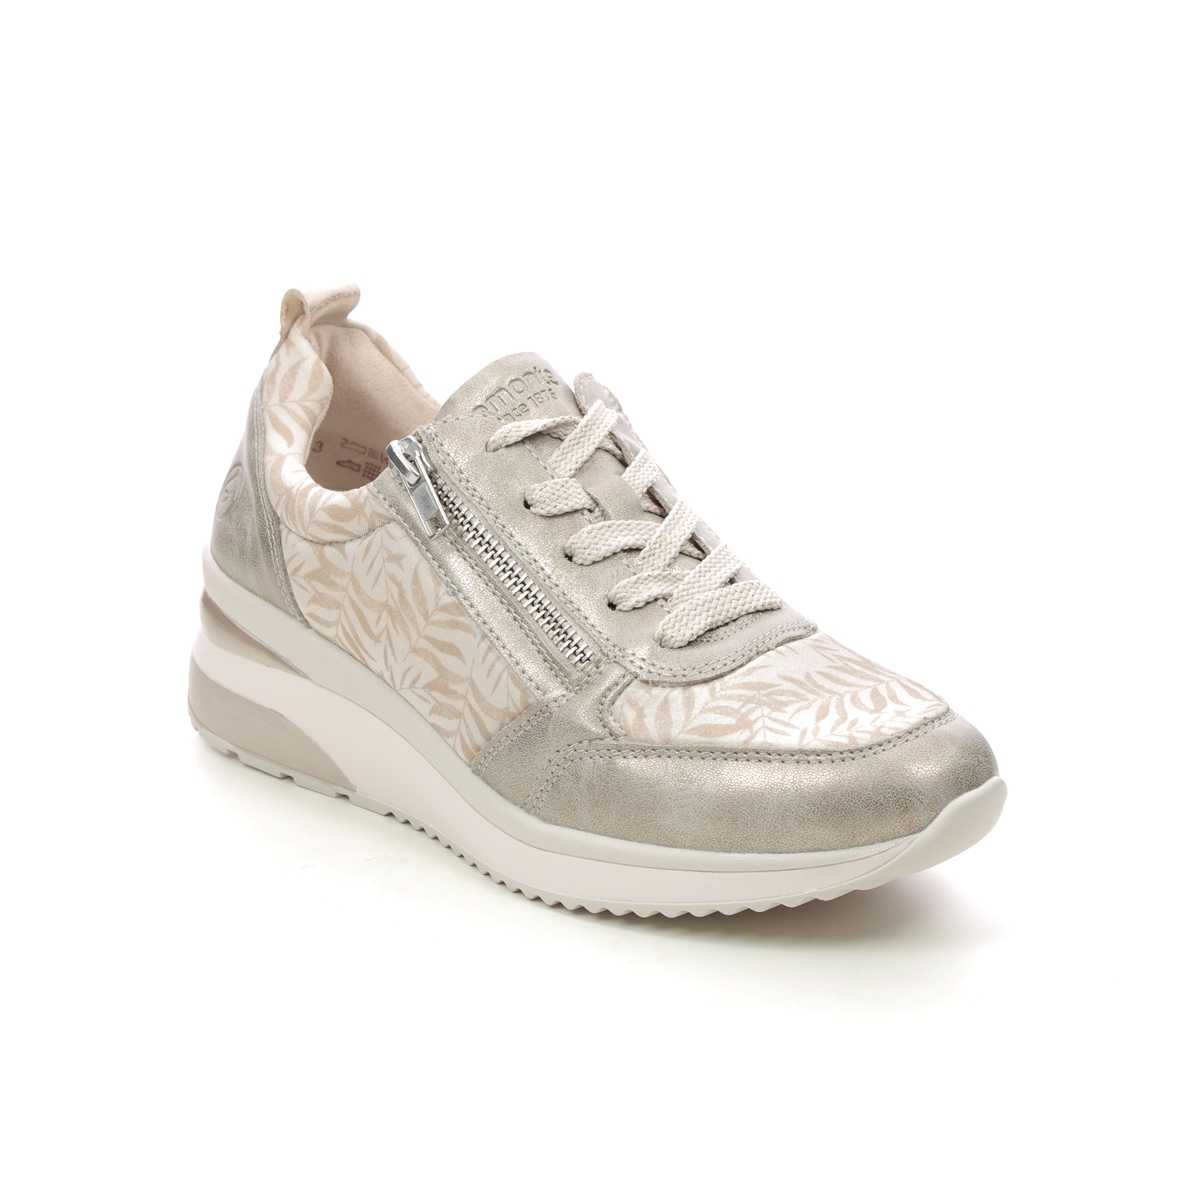 Remonte Rea Zip Wedge Light Gold Womens Trainers D2401-60 In Size 37 In Plain Light Gold